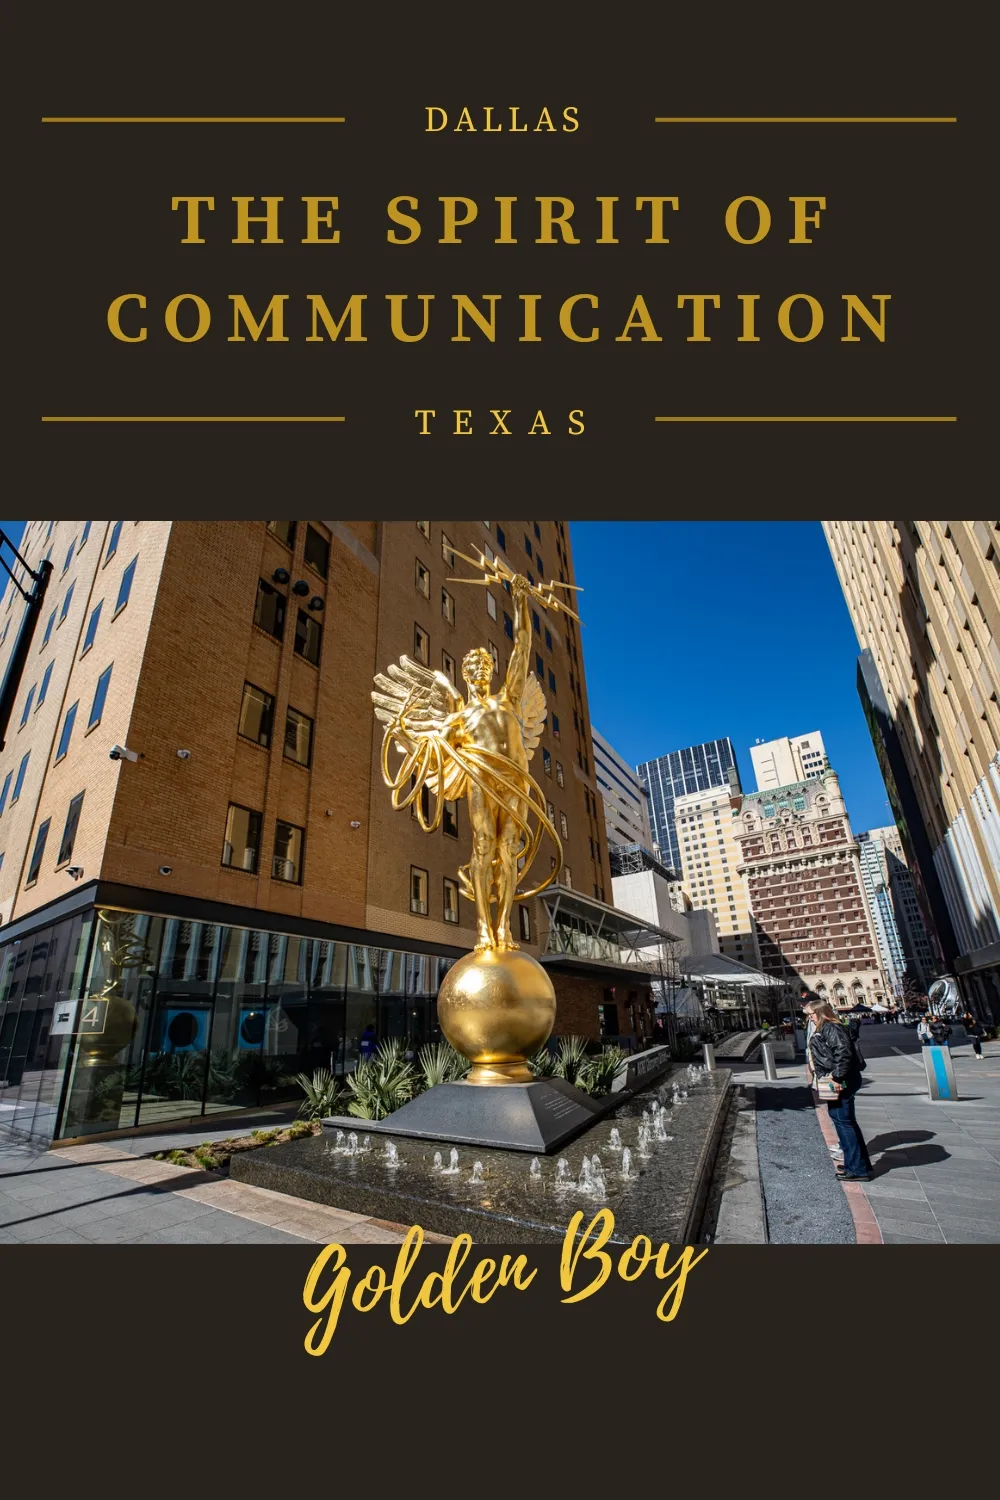 Call it "The Spirit of Communication." Call it "Genius of Telegraphy." Call it "Golden Boy." Whatever you call this big golden statue in Dallas, Texas, you'll definitely want to check it out while you're in town. This roadside attraction is the symbol of AT&T - visit it on a Texas road trip and add it to your Dallas vacation itinerary. #RoadTrip #texasRoadTrip #RoadsideAttraction #RoadsideAttractions #TexasRoadsideAttraction #TexasRoadsideAttractions #Dallas #DallasTexas #Texas